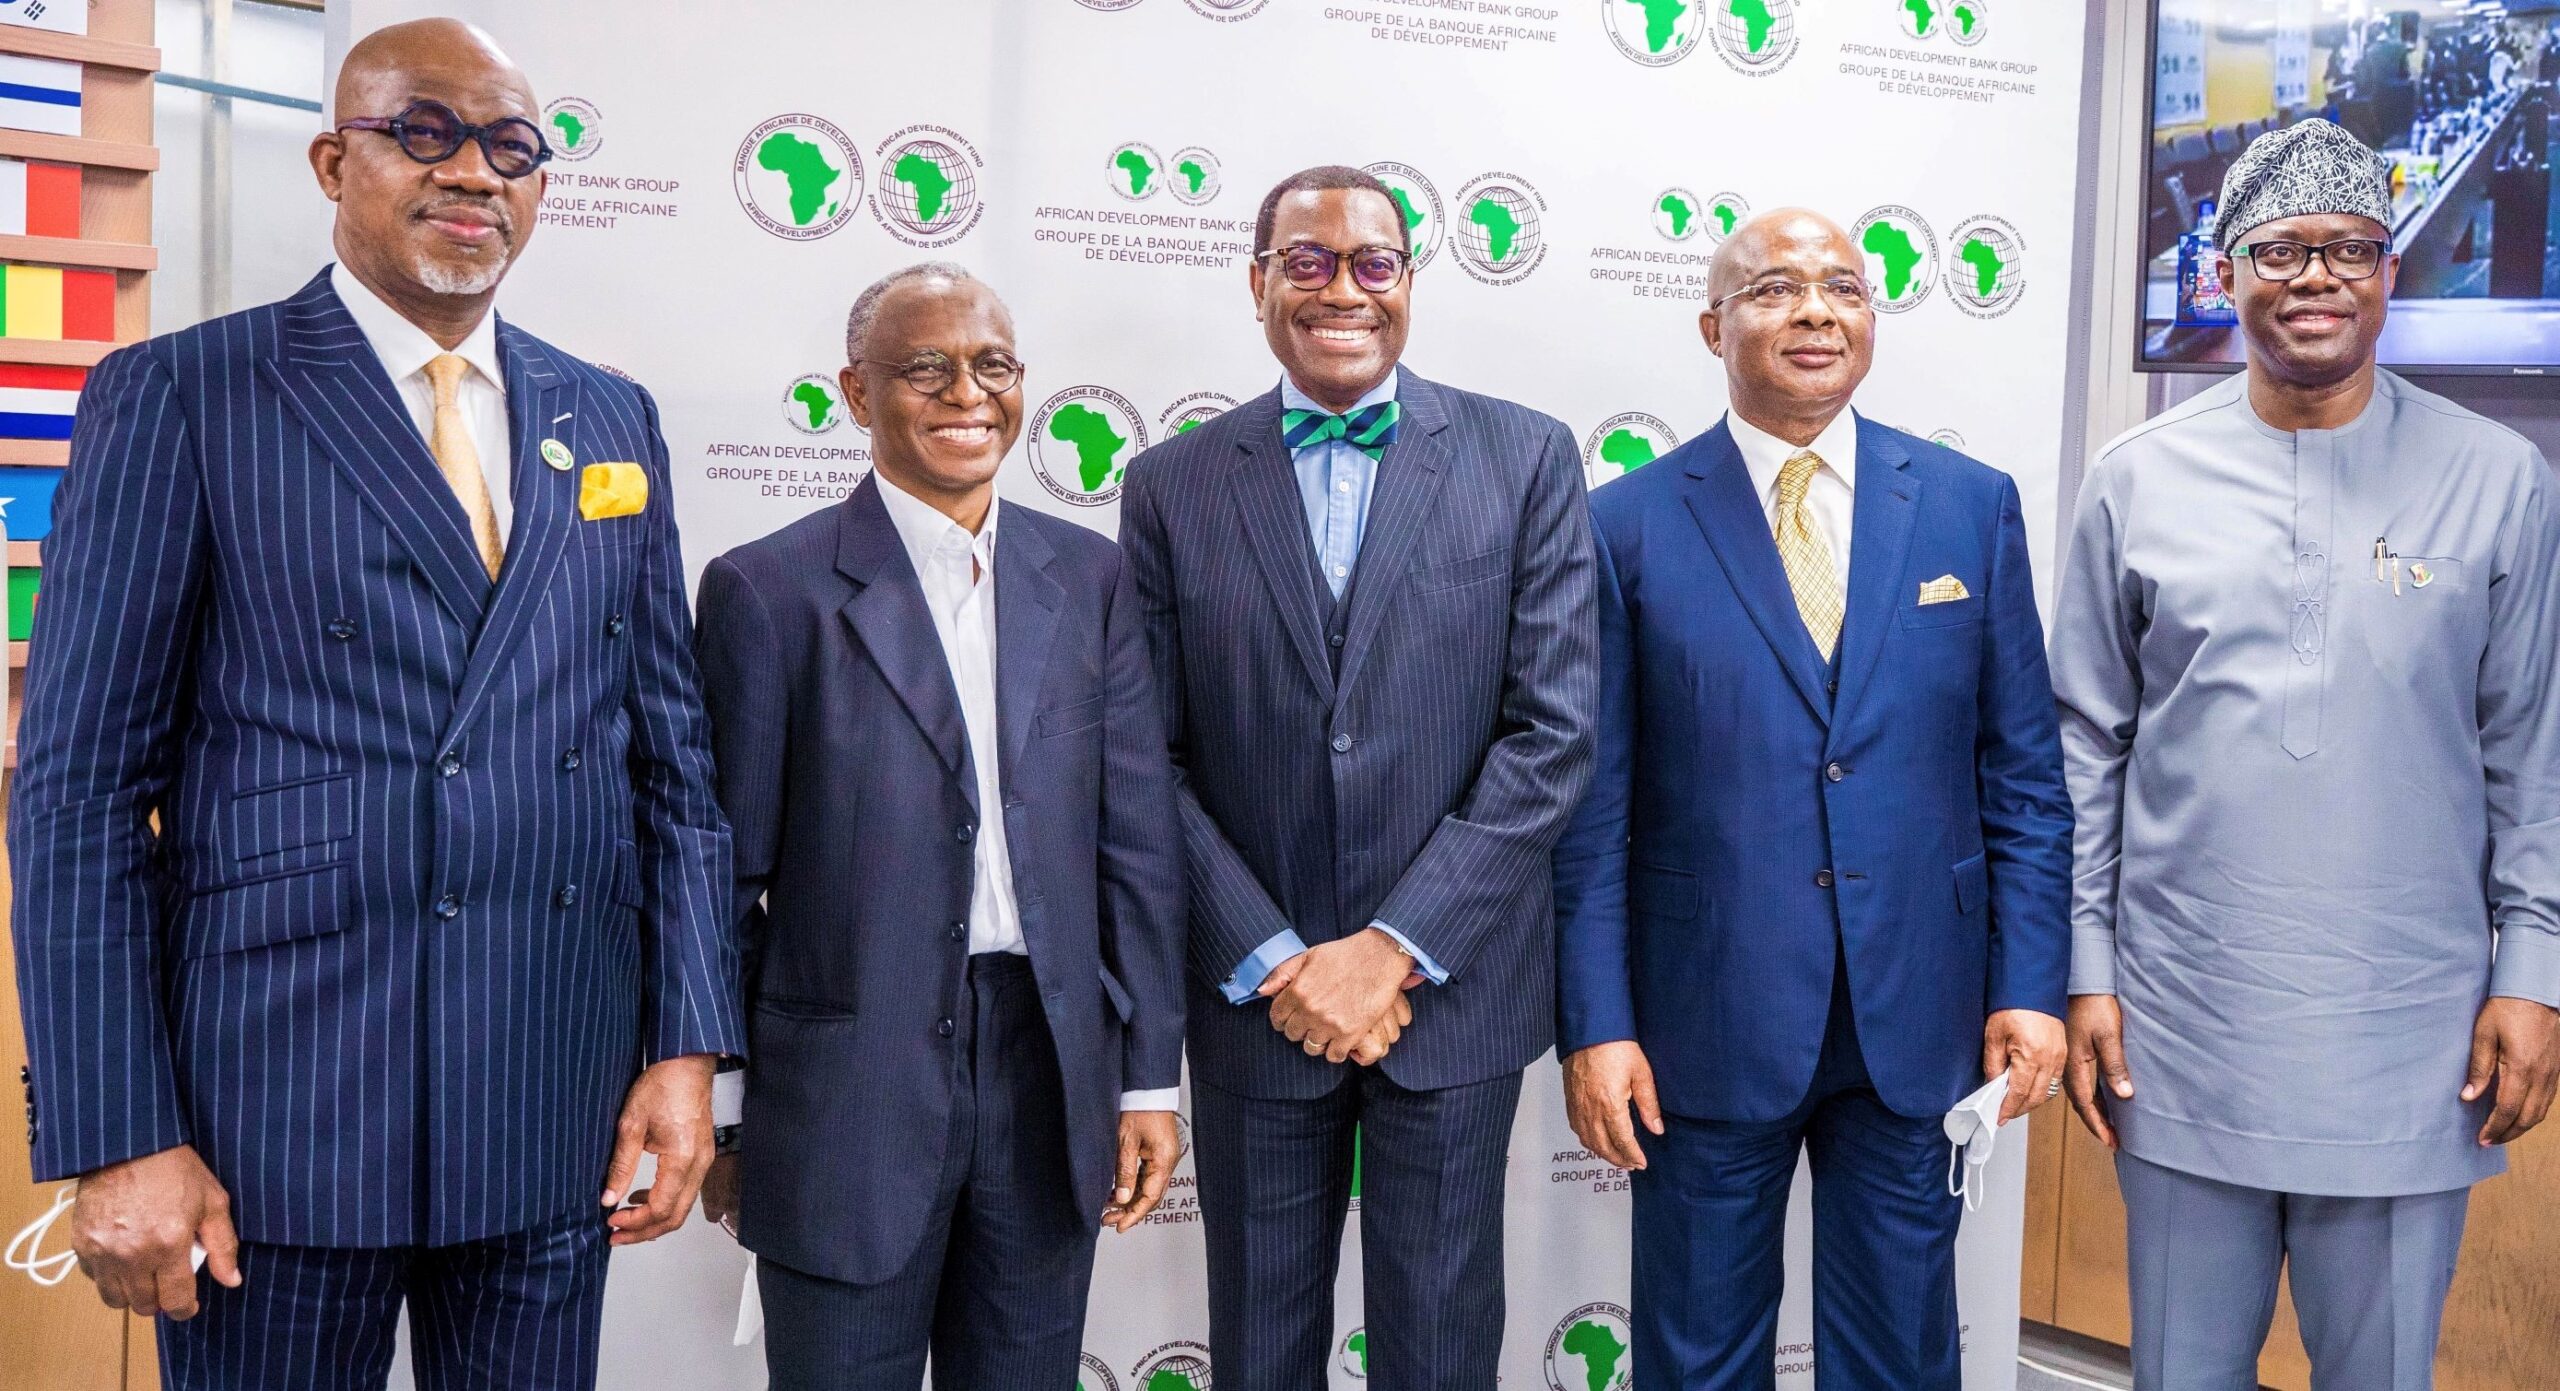 Photo: Some Nigeria Governors And AfDB President, Dr Adesina At The SAPZ Programme In Cote d’ lvoire On Tuesday